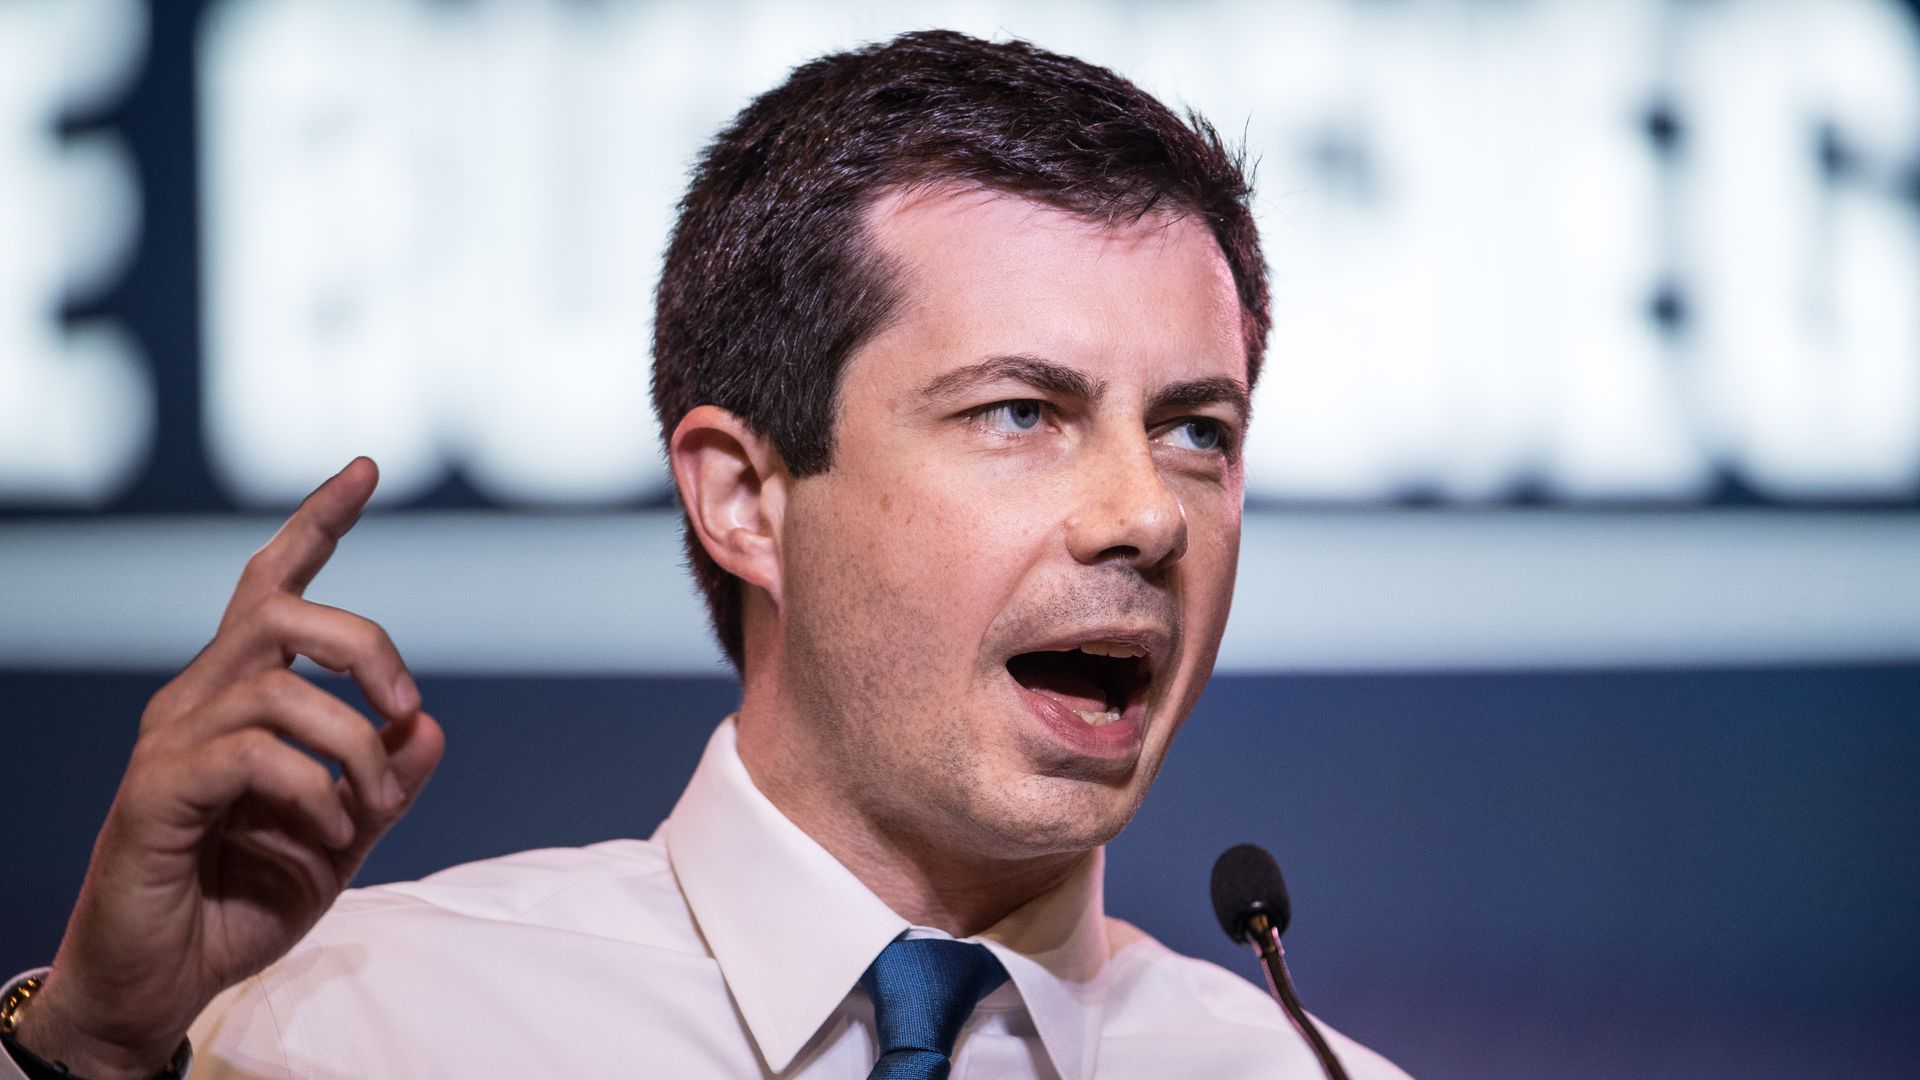  Democratic presidential candidate South Bend, Indiana Mayor Pete Buttigieg addresses the crowd at the 2019 South Carolina Democratic Party State Convention on June 22.